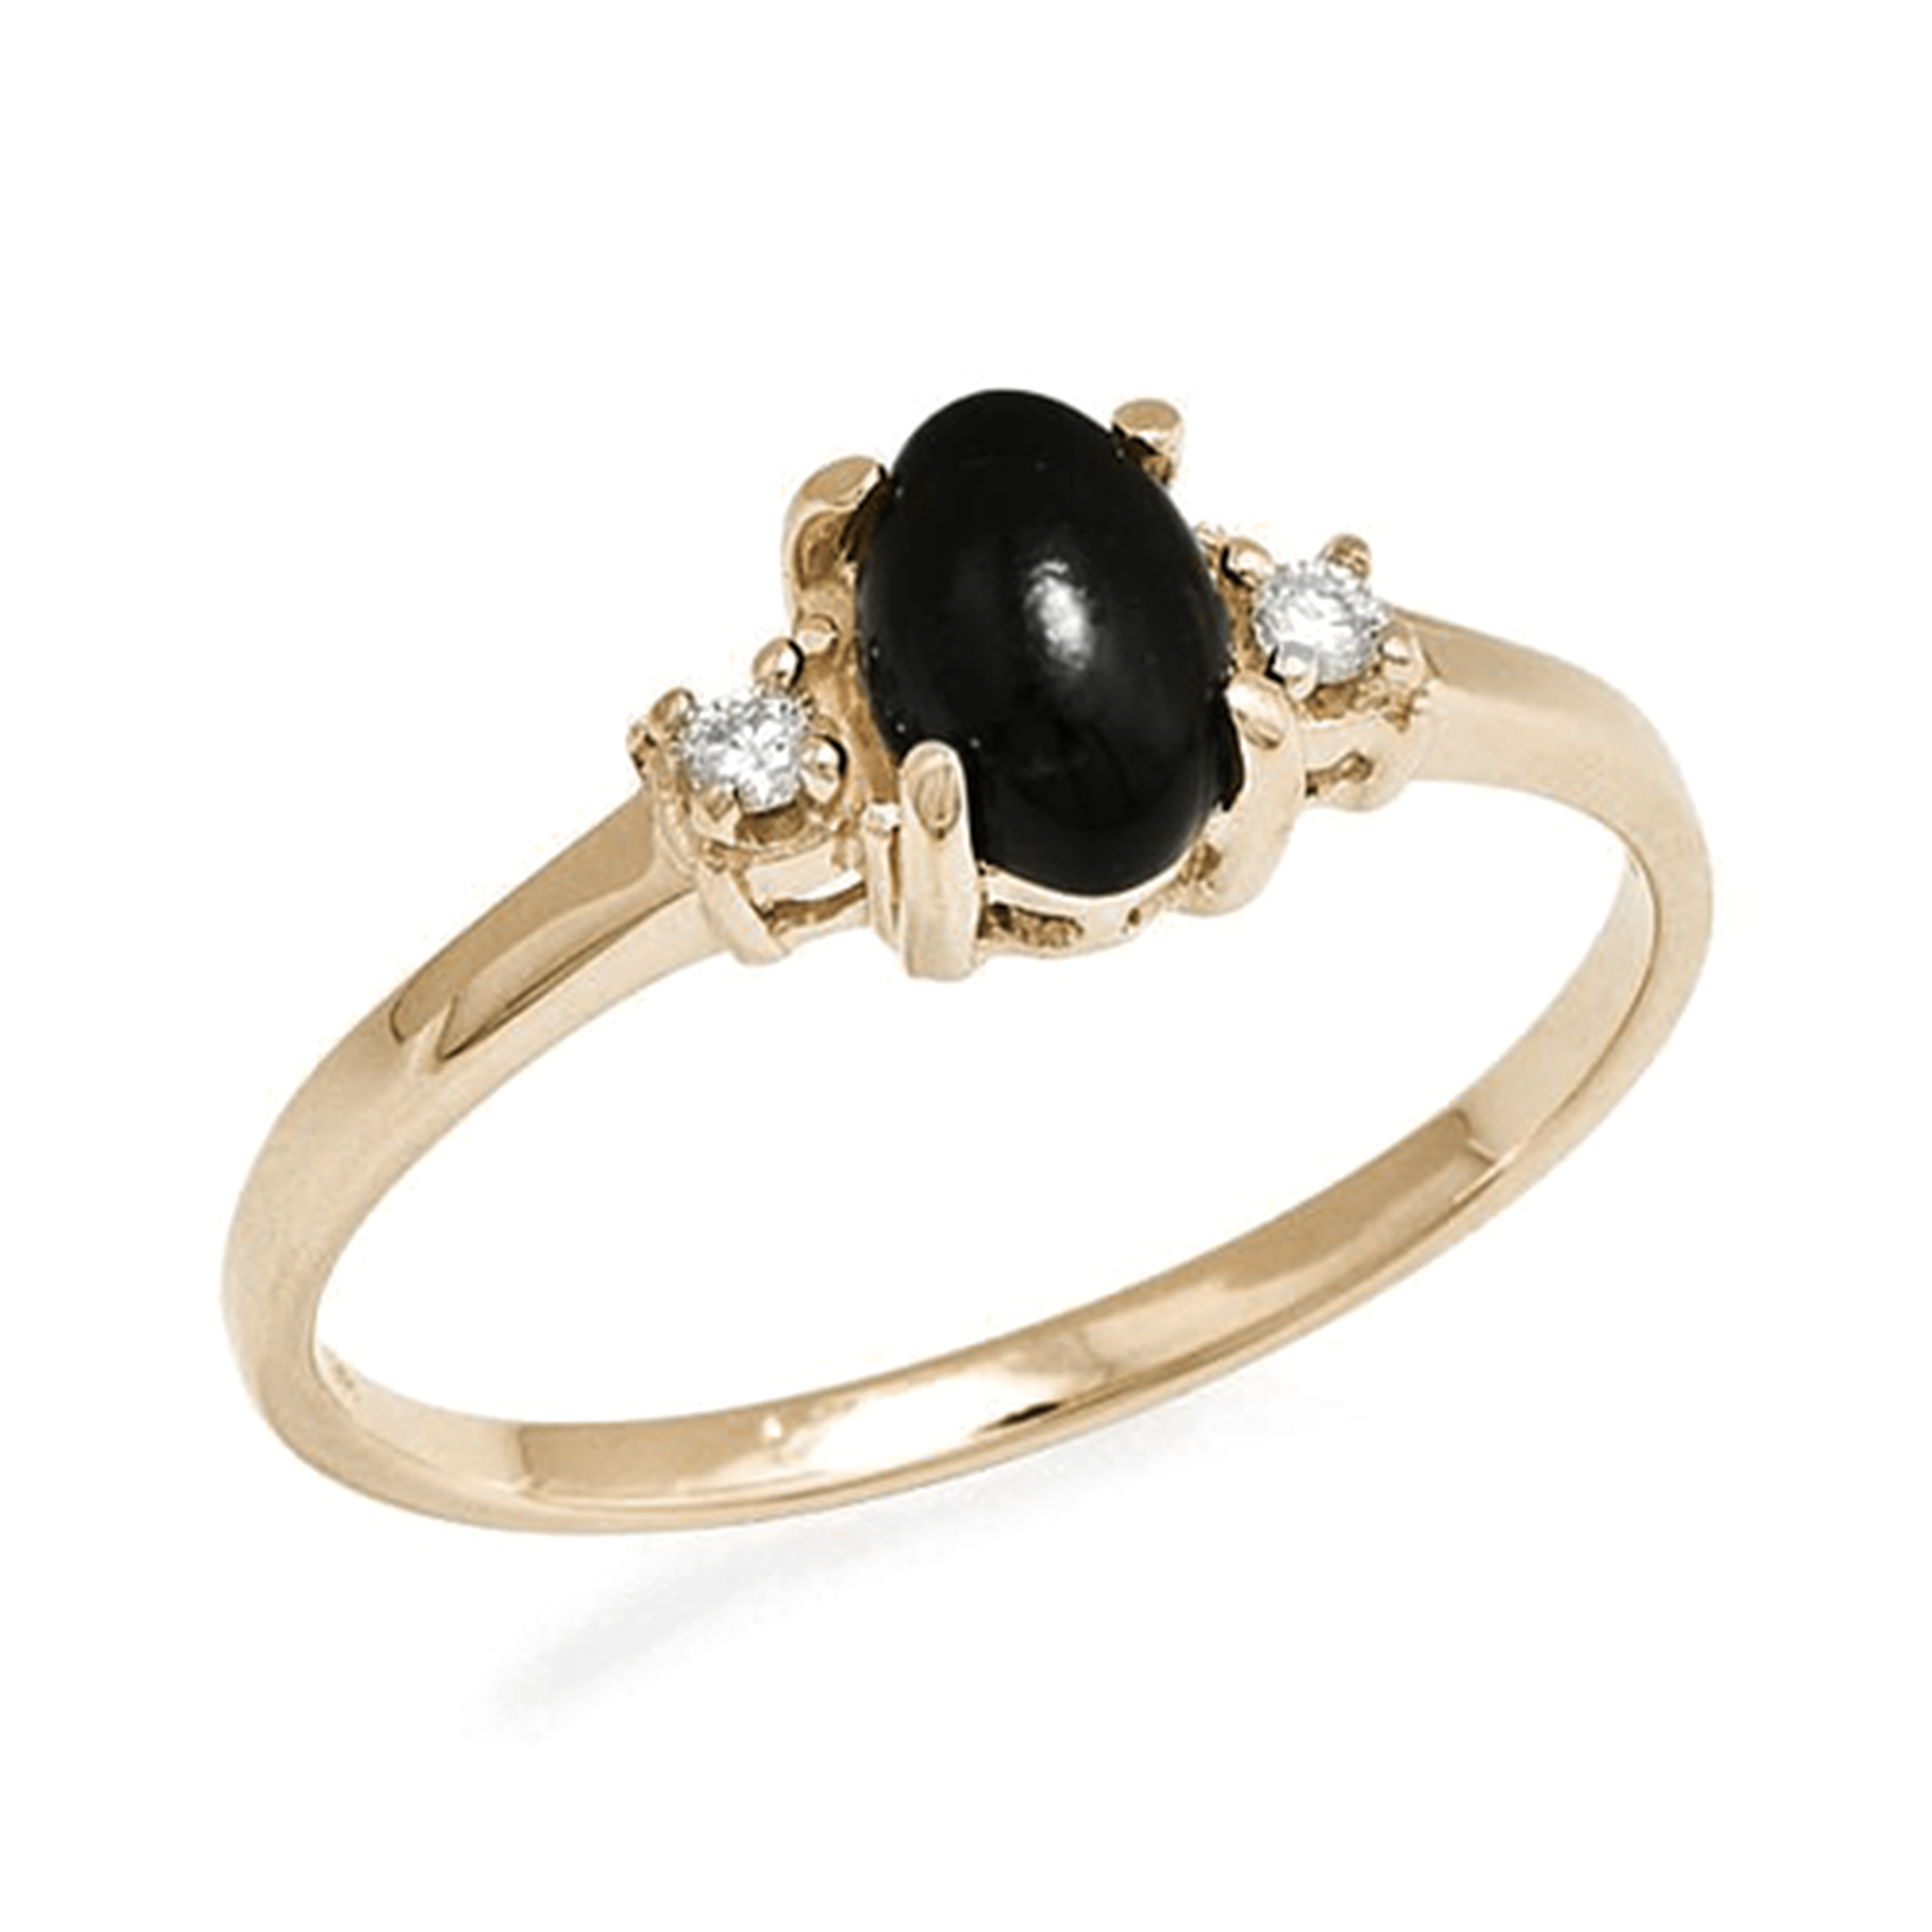 Black Coral Ring with Diamonds in Gold-Maui Divers Jewelry